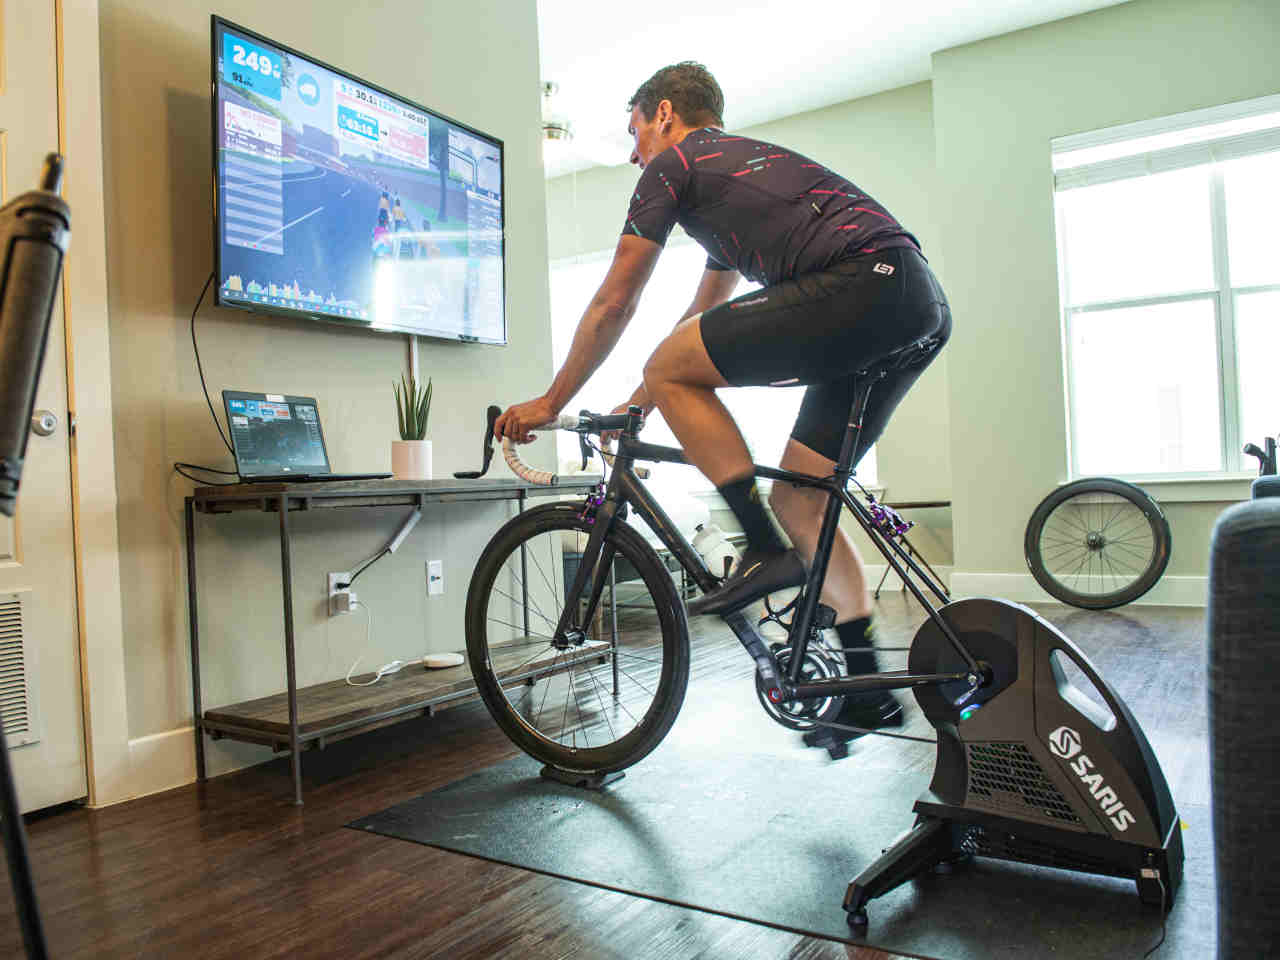 man riding a bike on a trainer while watching TV